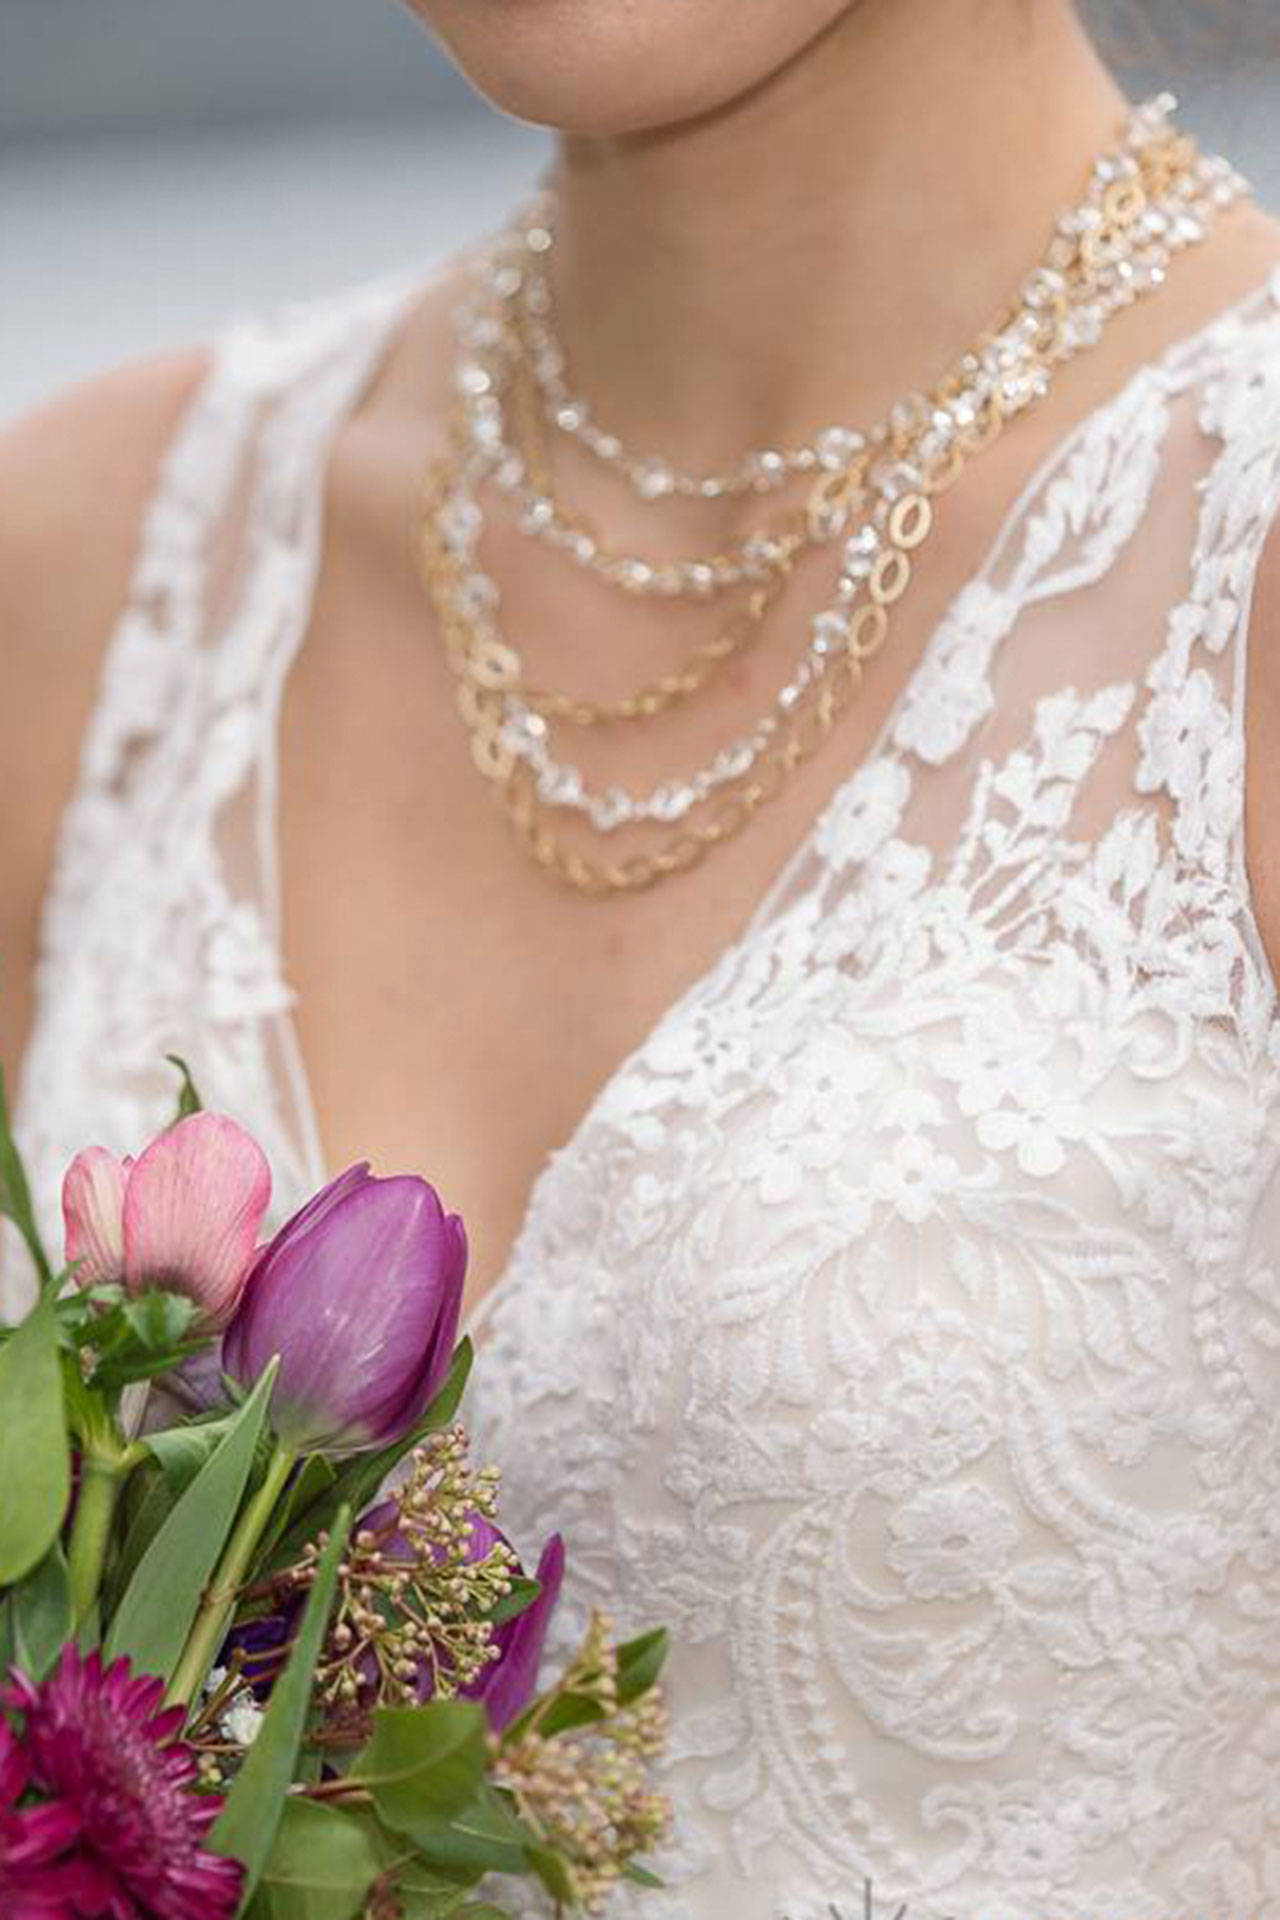 It’s not your mother’s pearl necklace anymore | 2017 Kitsap Wedding Guide